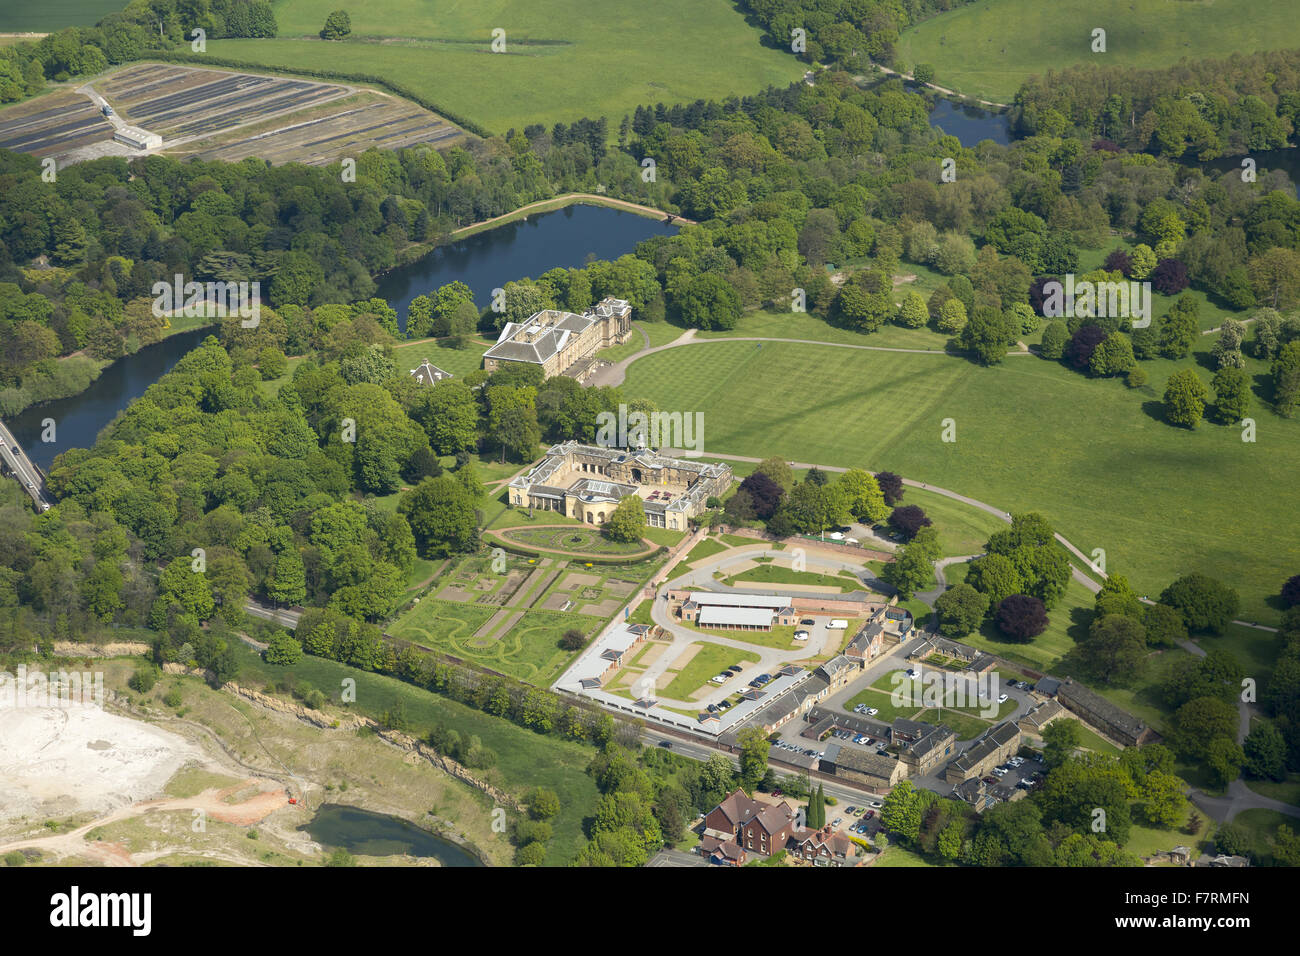 An aerial view of Nostell Priory and Parkland, West Yorkshire. Nostell Priory was the home of the Winn family for more than 350 years. Stock Photo